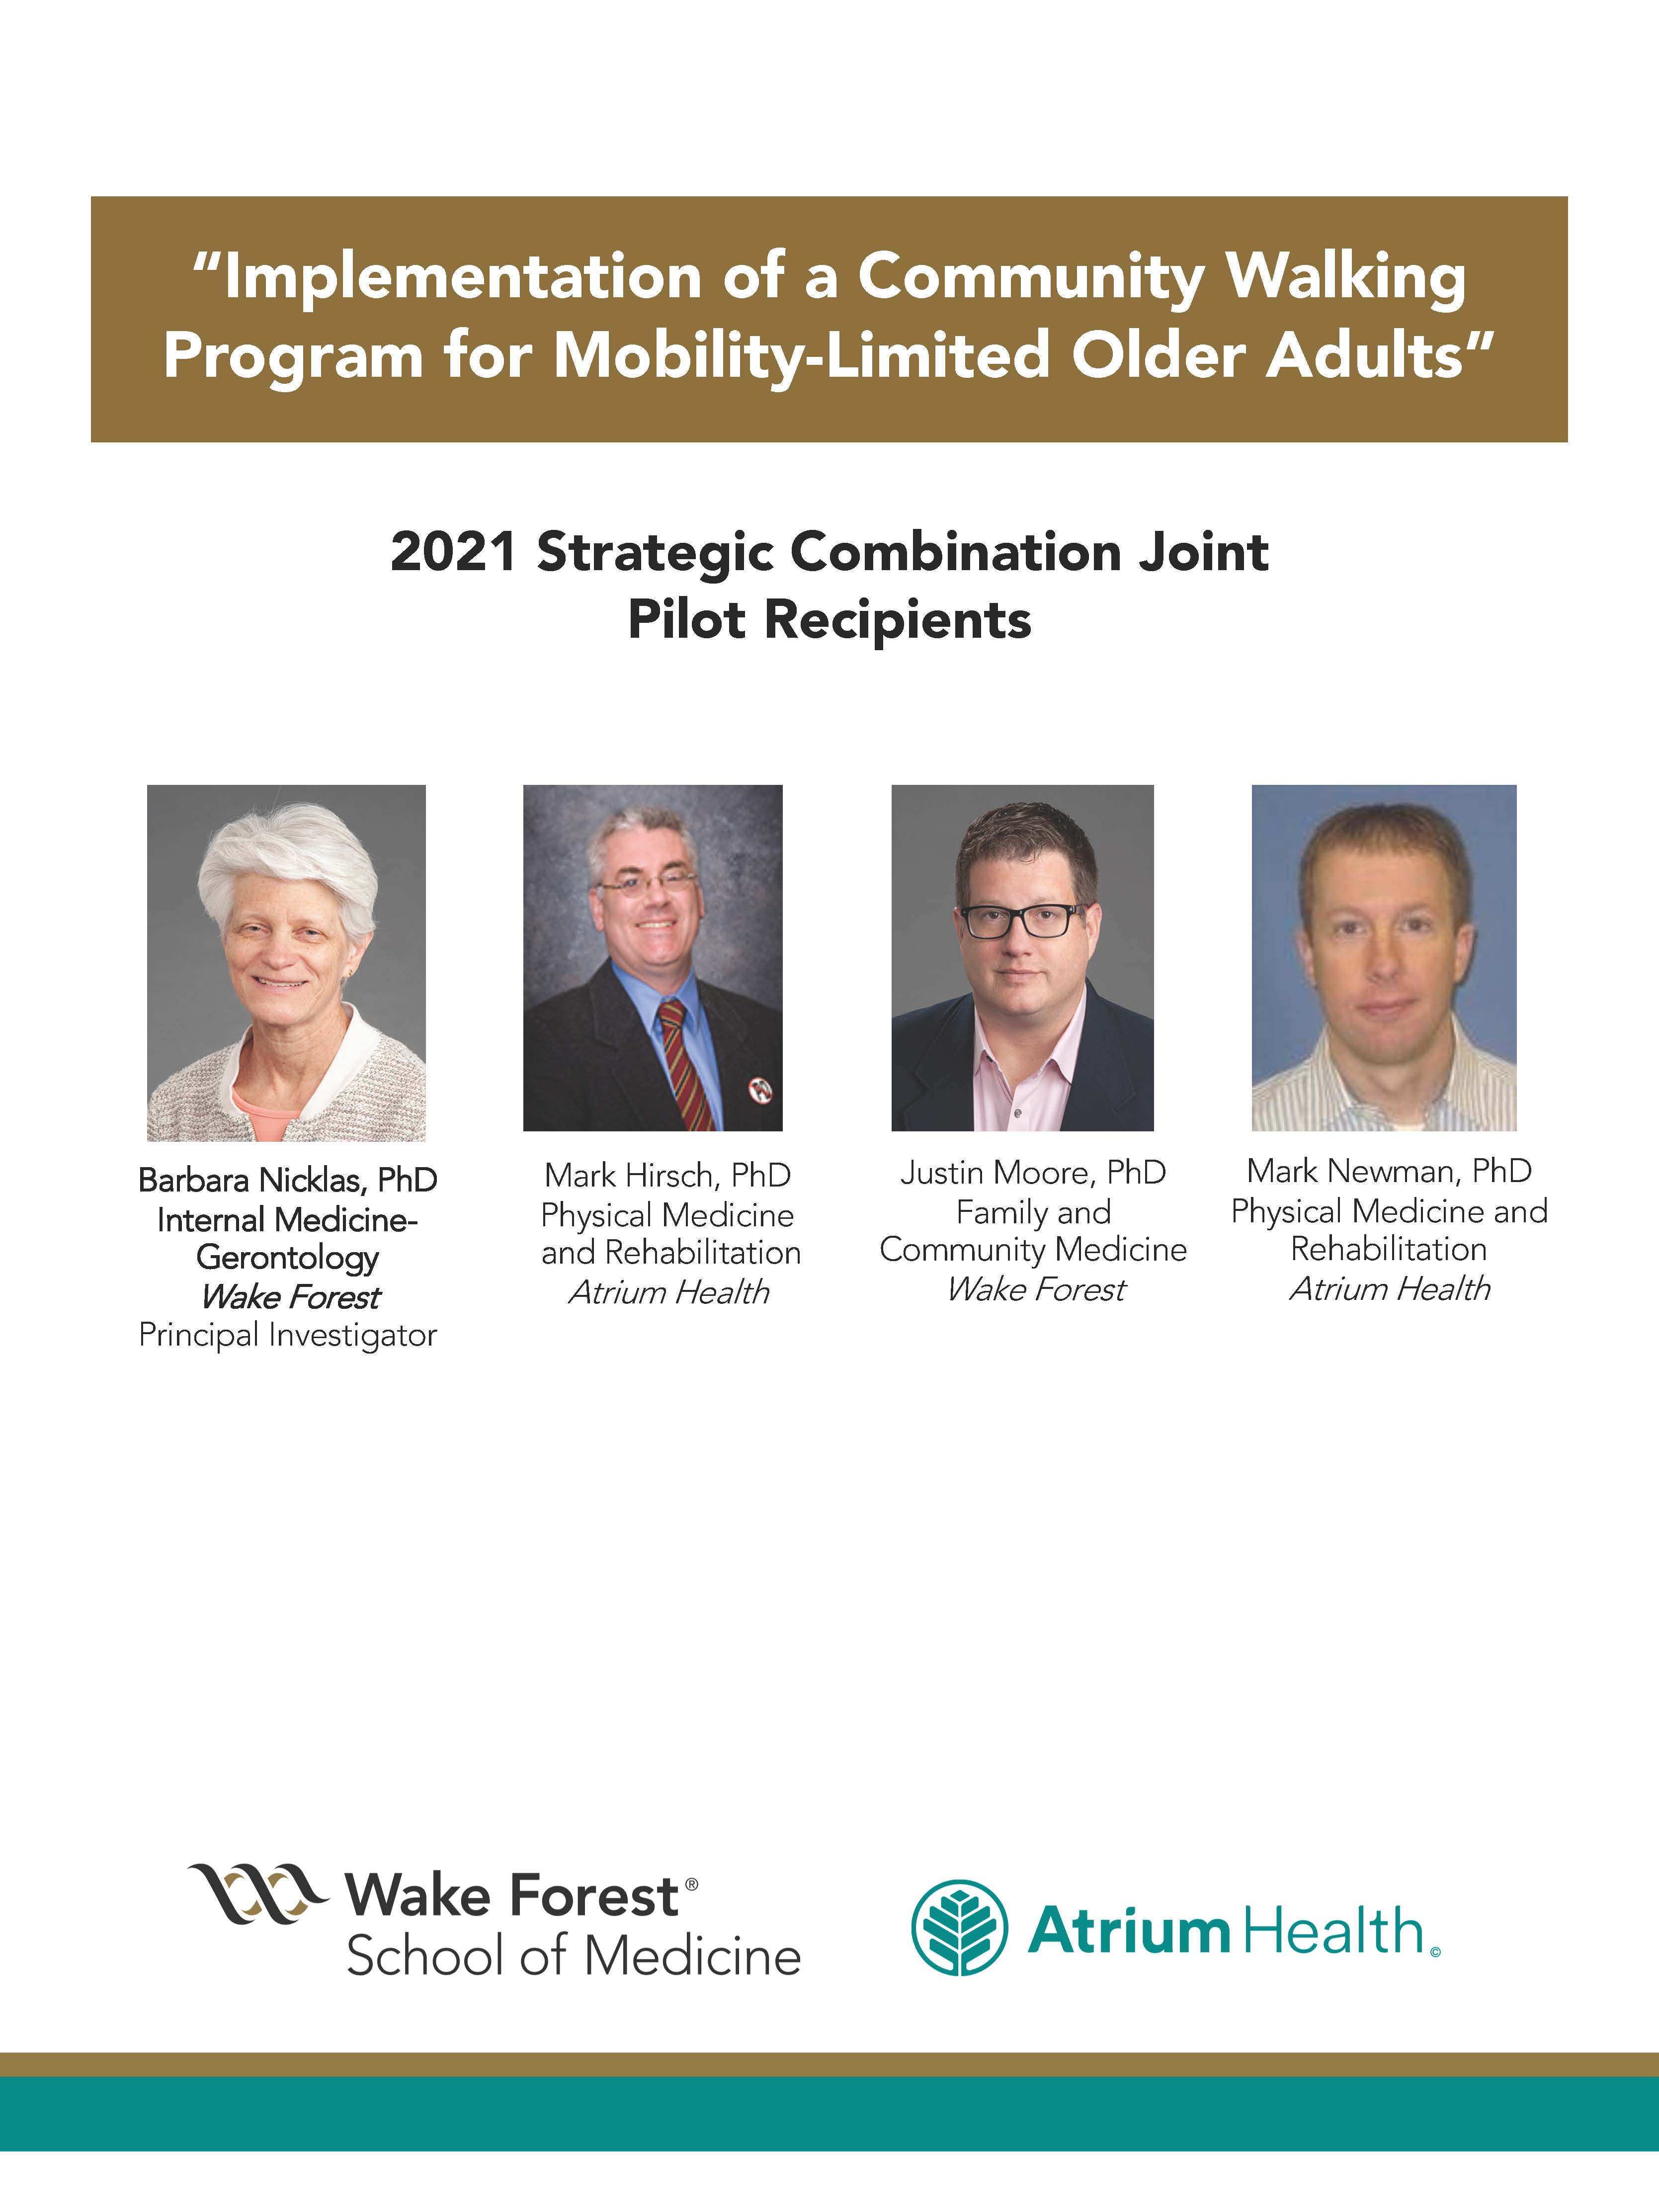 “Implementation of a Community Walking Program for Mobility-Limited Older Adults”